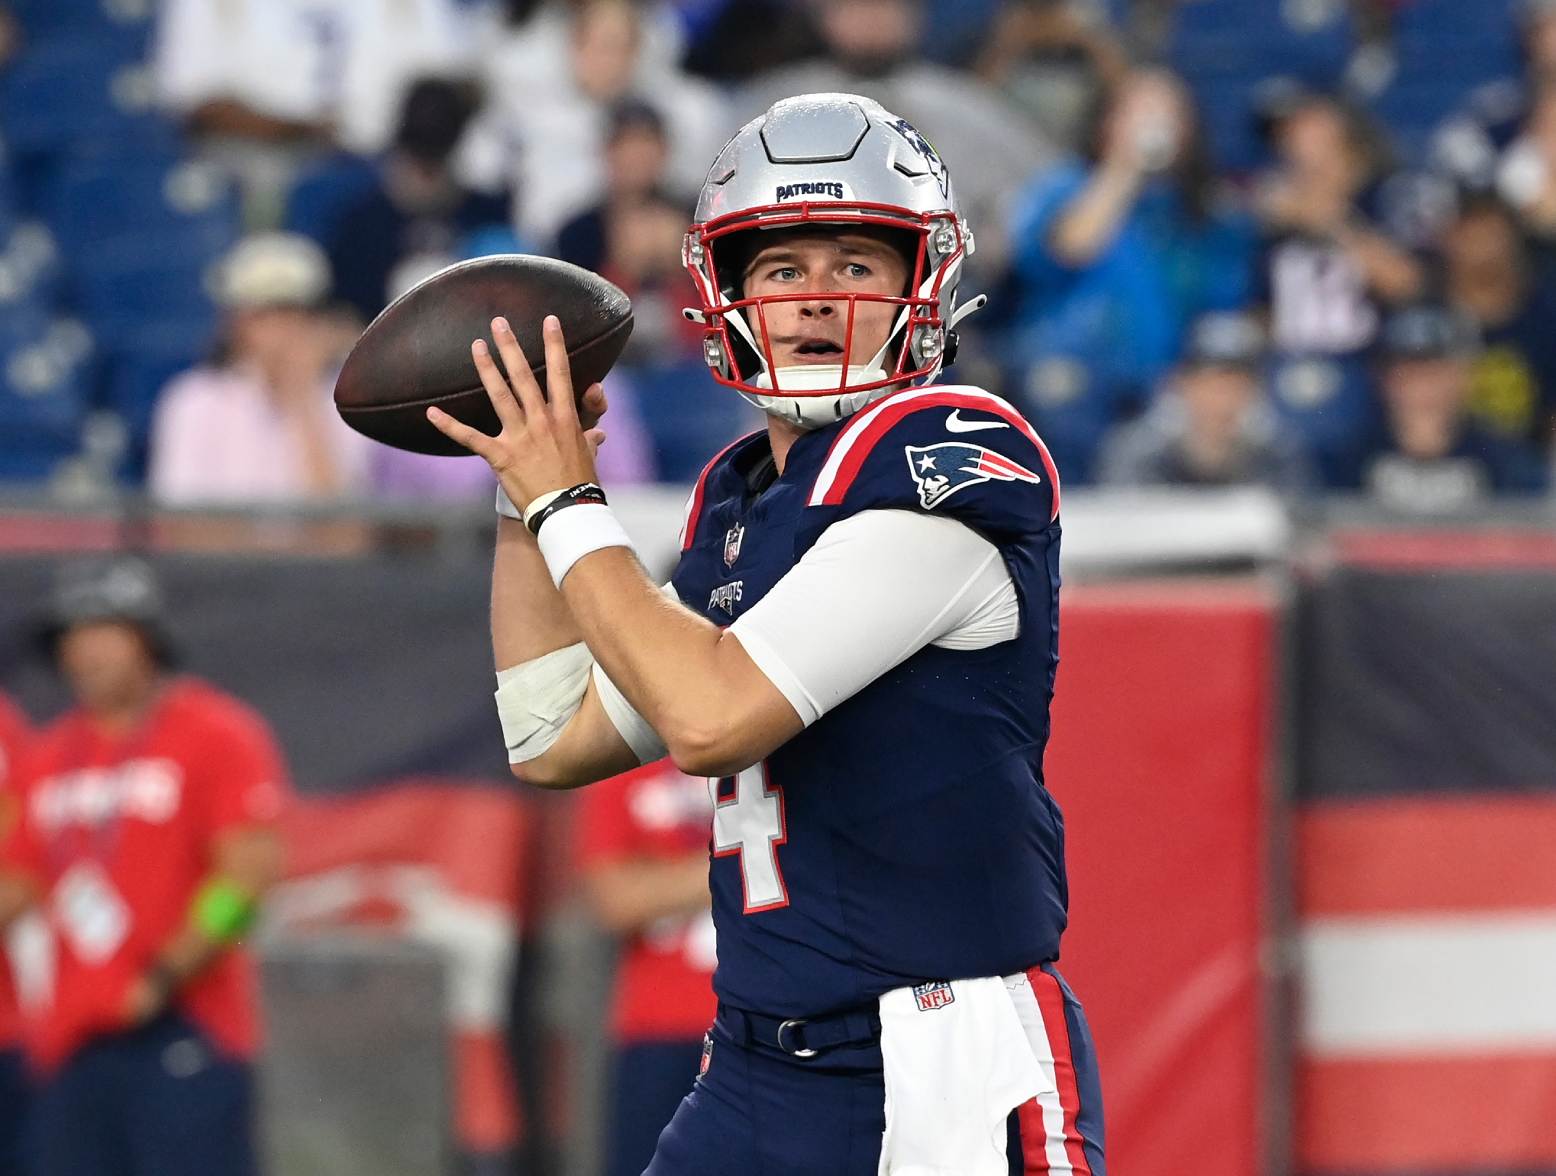 Aug 10, 2023; Foxborough, Massachusetts, USA; New England Patriots quarterback Bailey Zappe (4) looks to make a pass during the first half against the Houston Texans at Gillette Stadium. Credit: Eric Canha-USA TODAY Sports